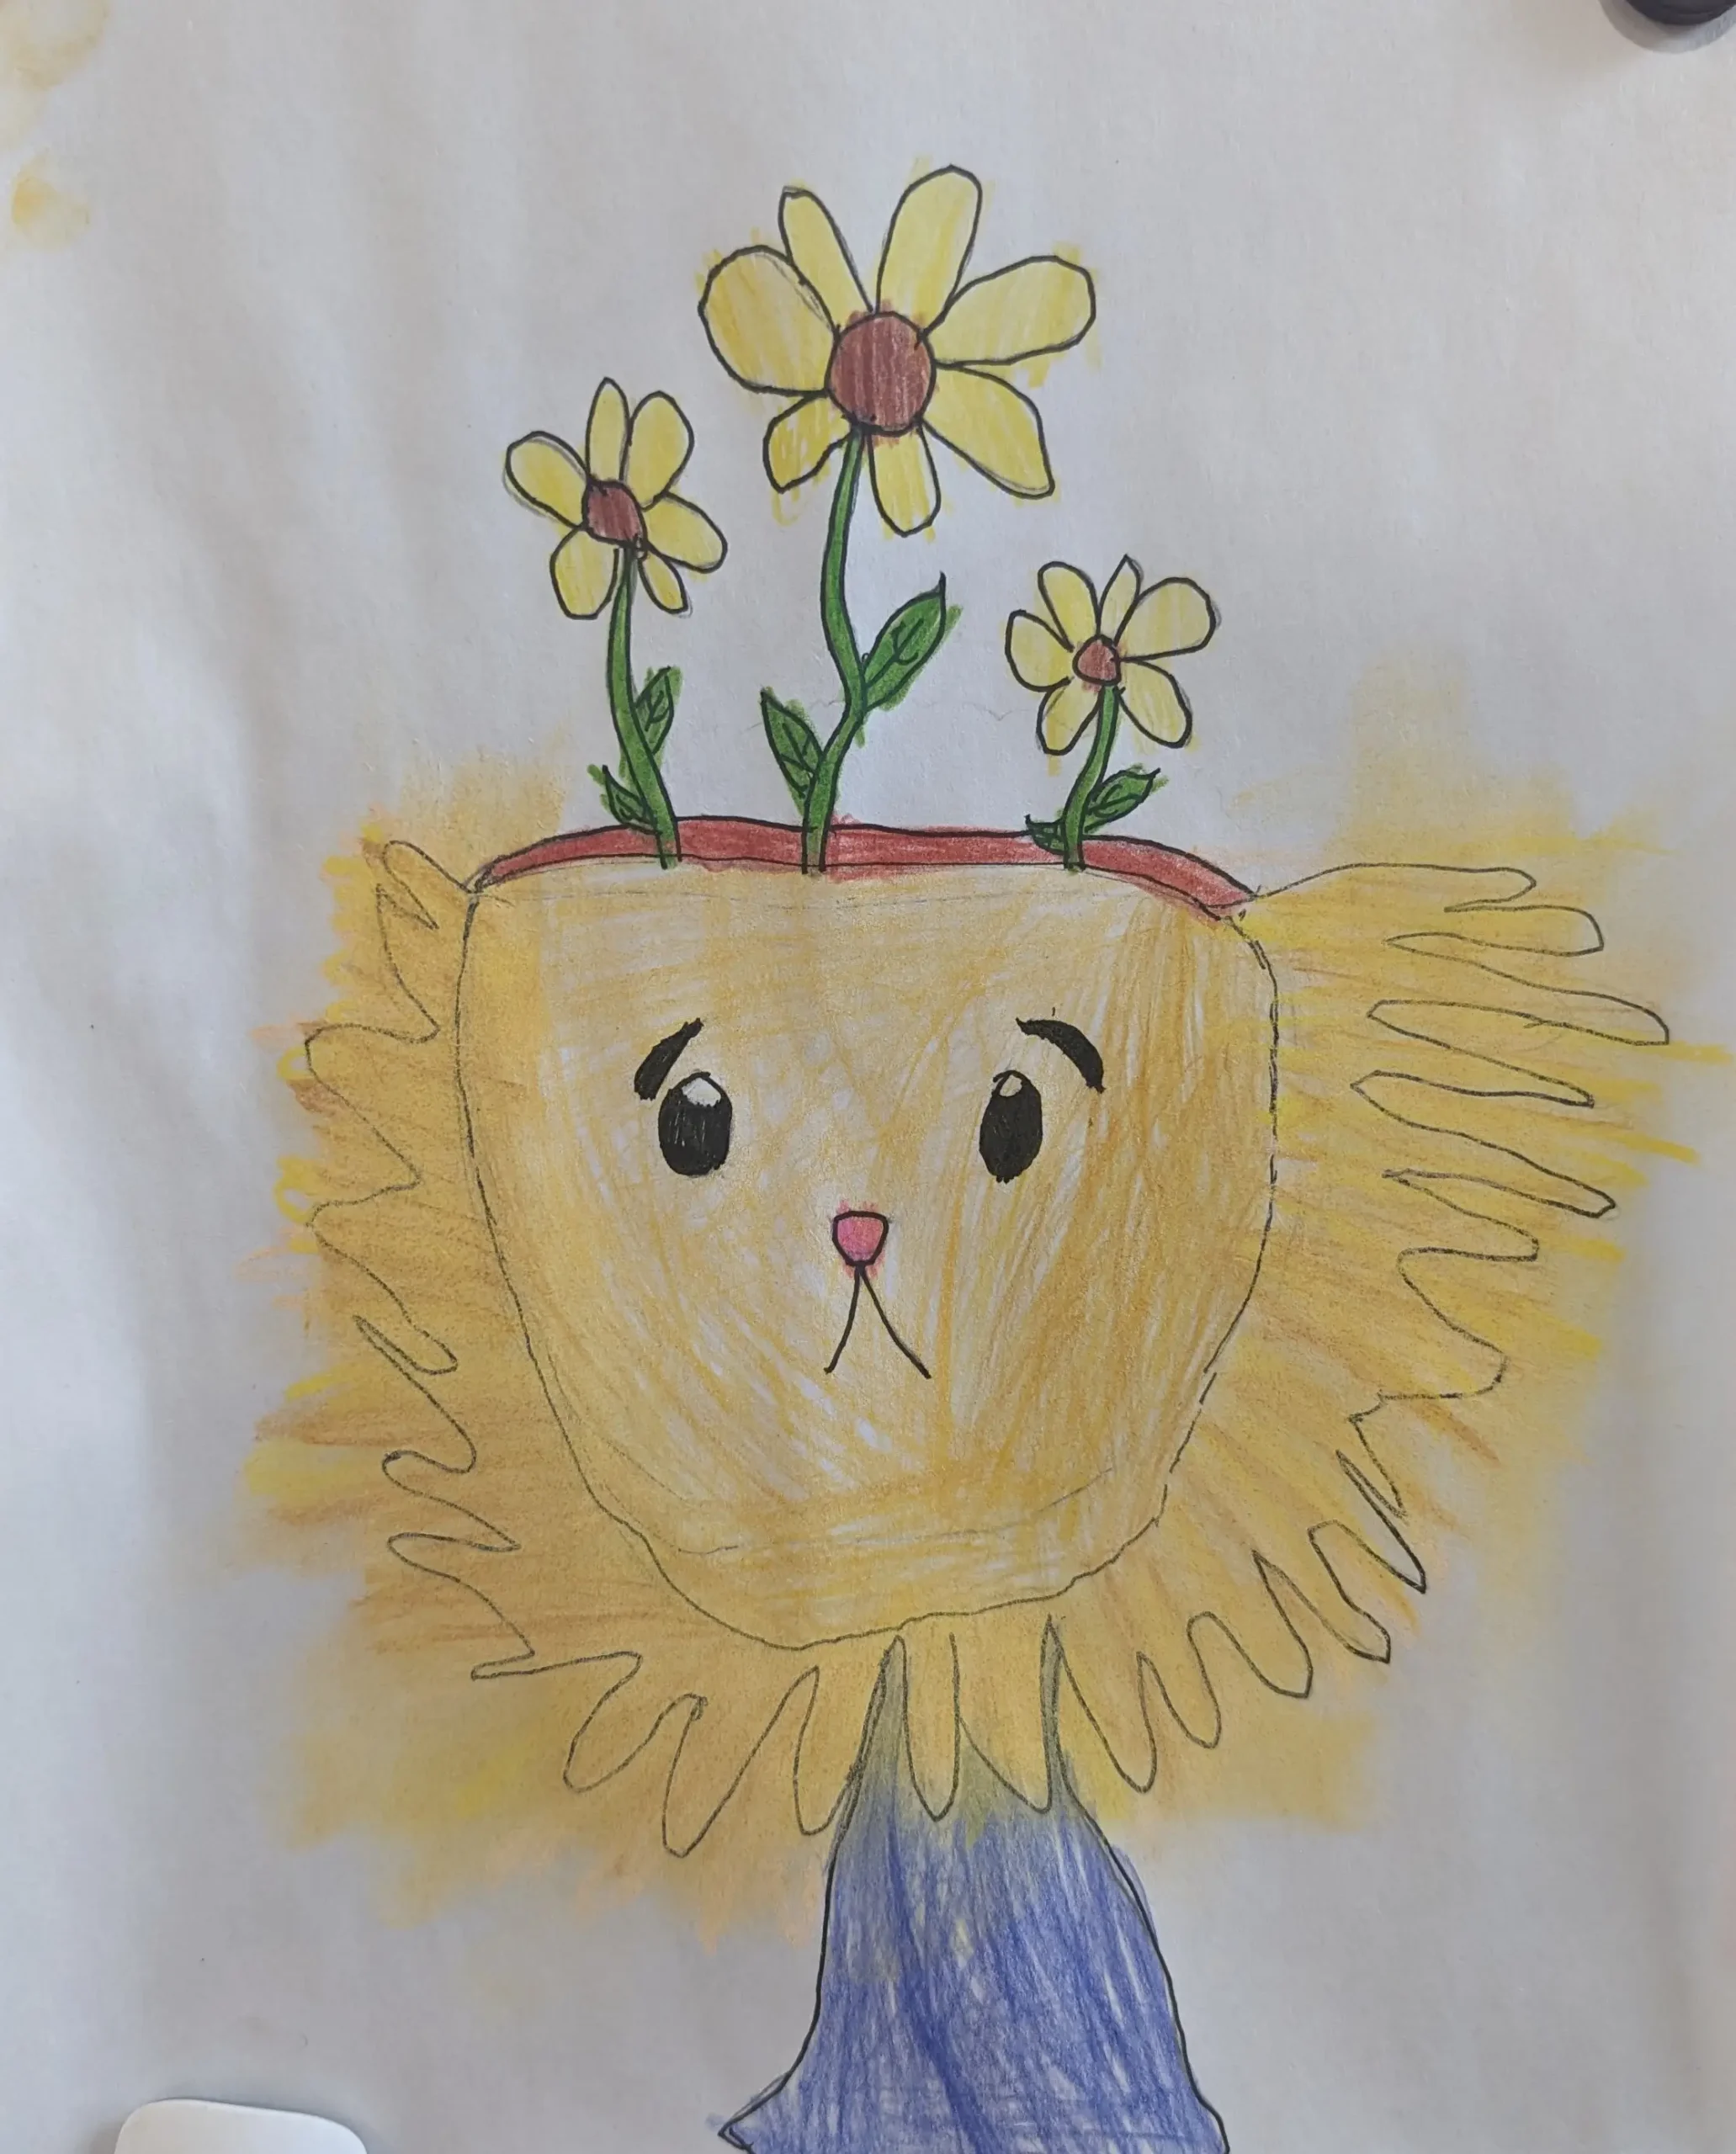 artwork from student of face with flowers